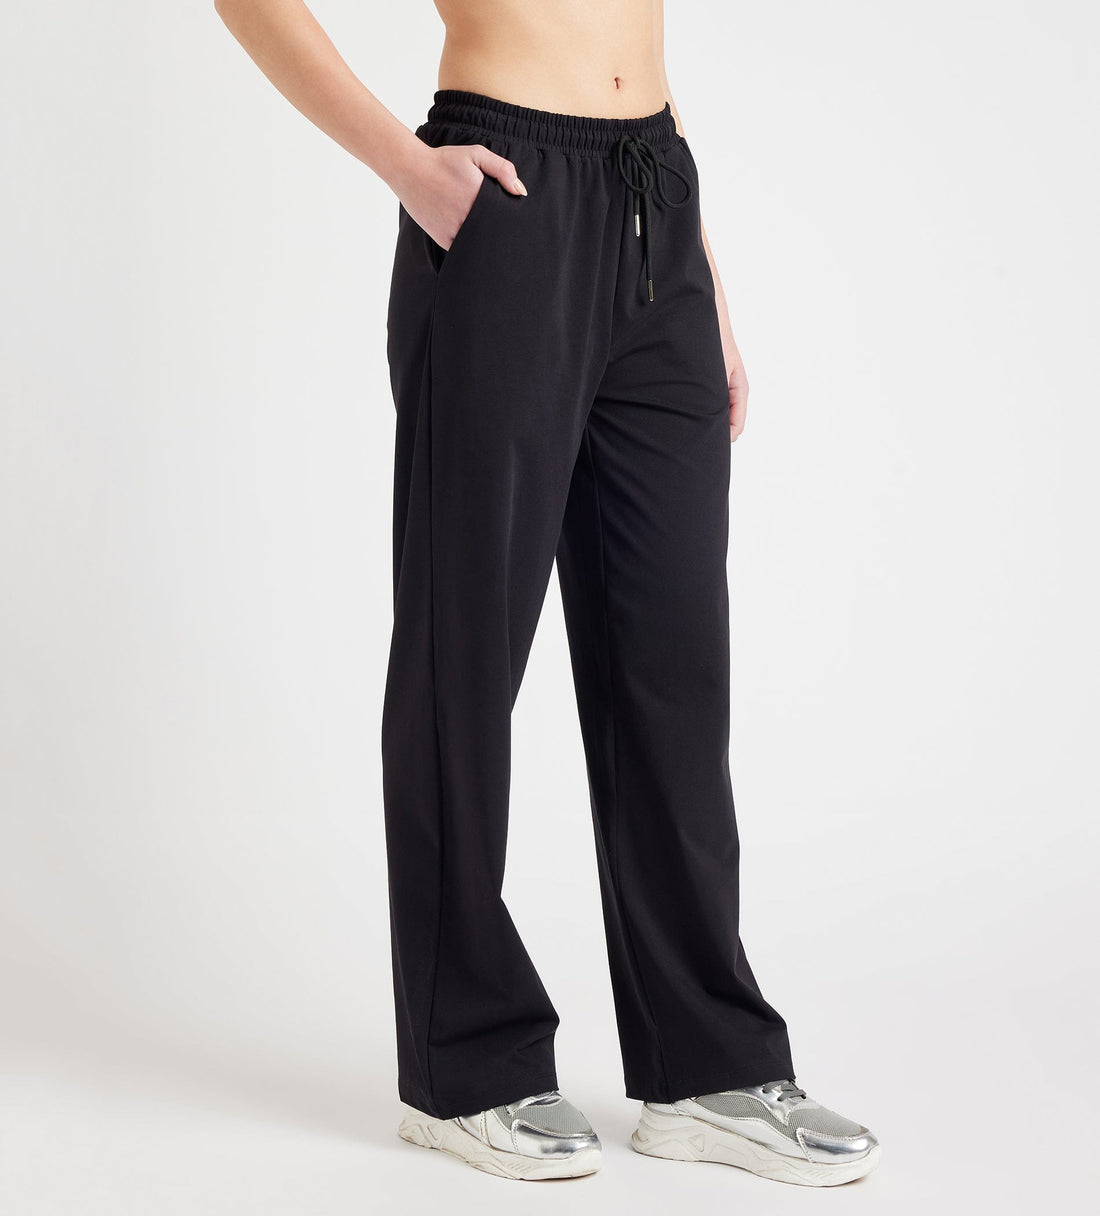 Trackpants Open Bottom Trackpant Everyday Cotton Wide Leg Trackpants